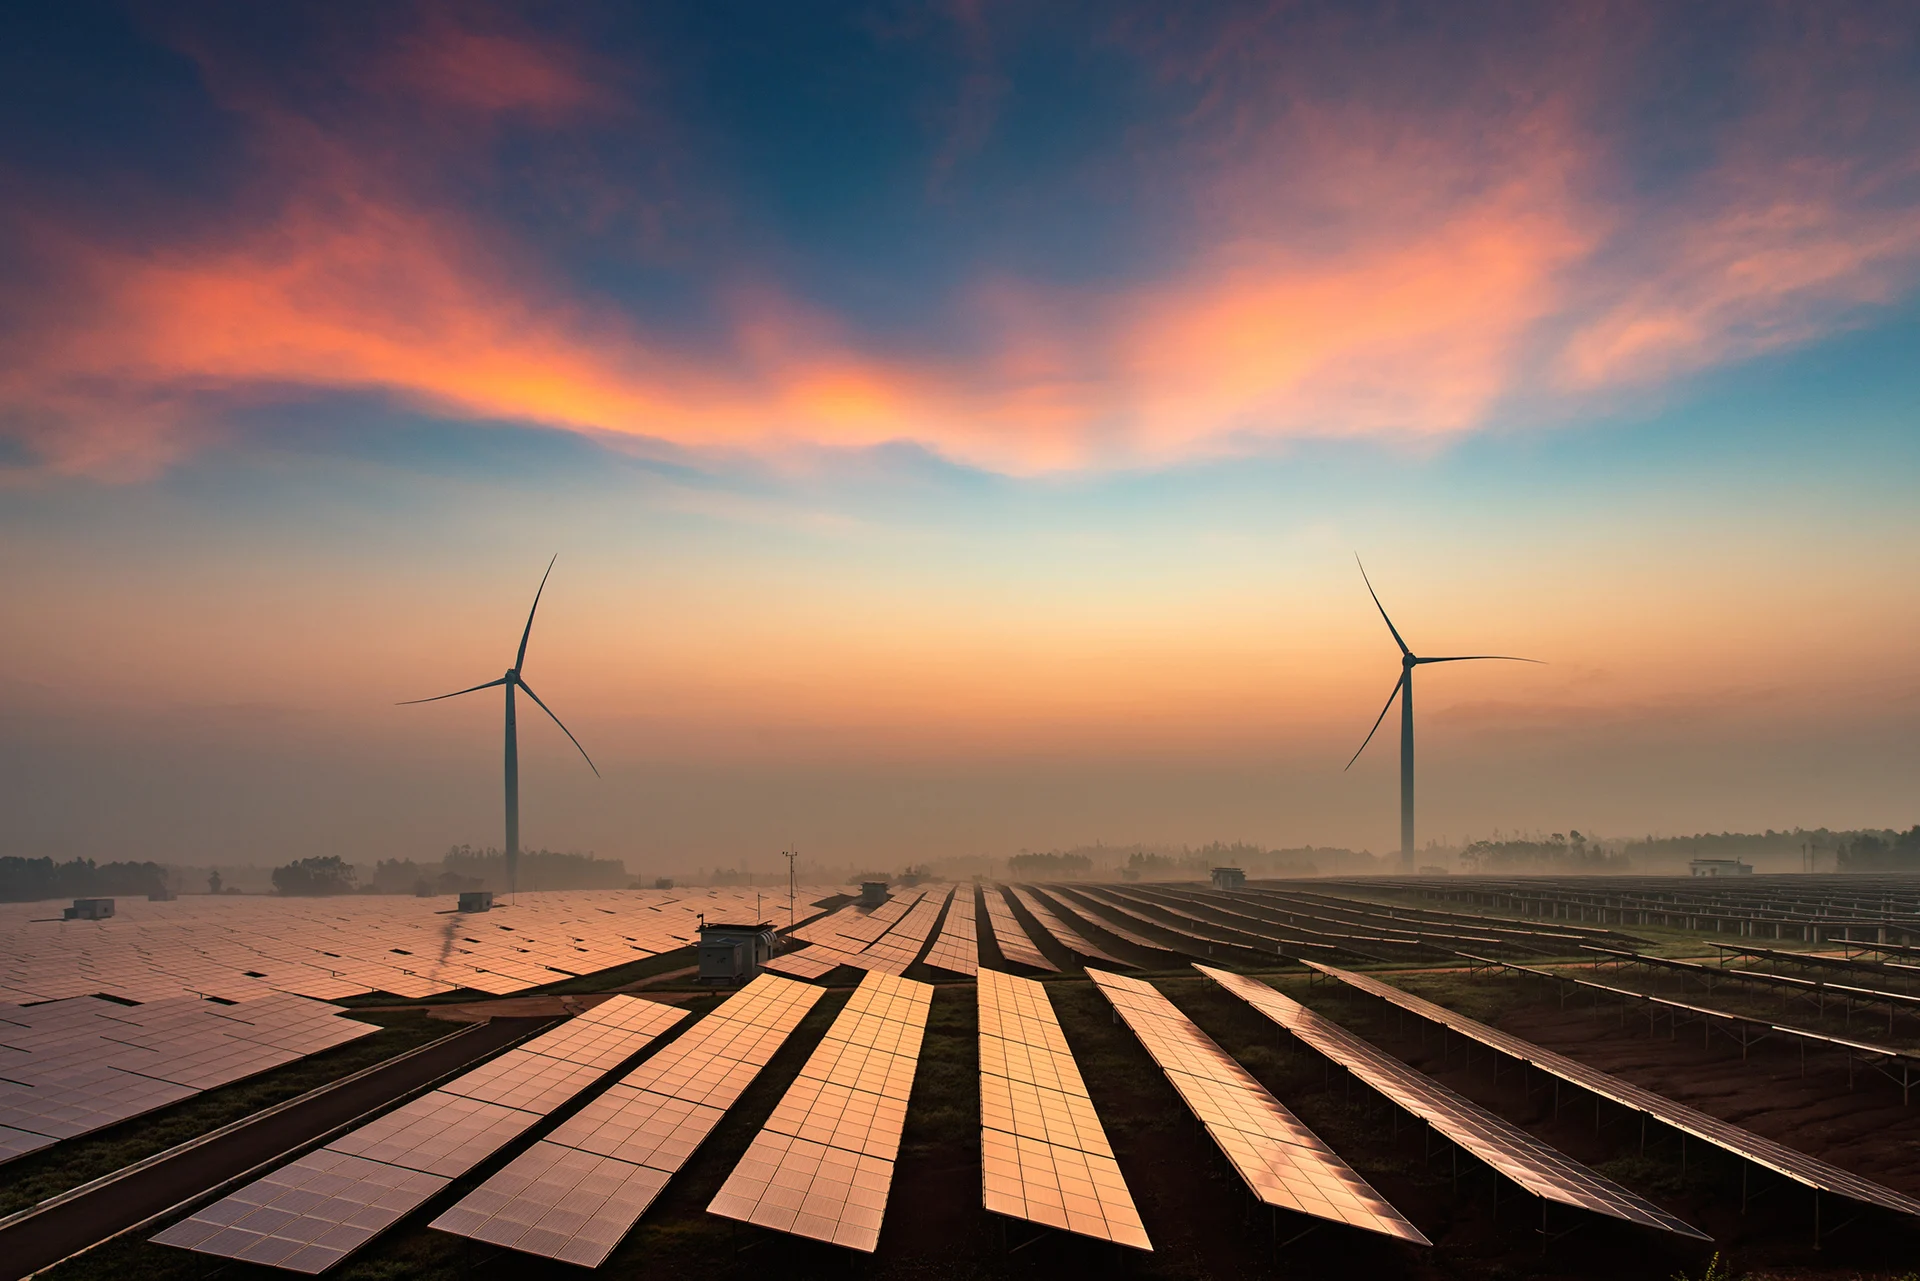 Transitioning to 100% renewable energy by 2050 would pay for itself